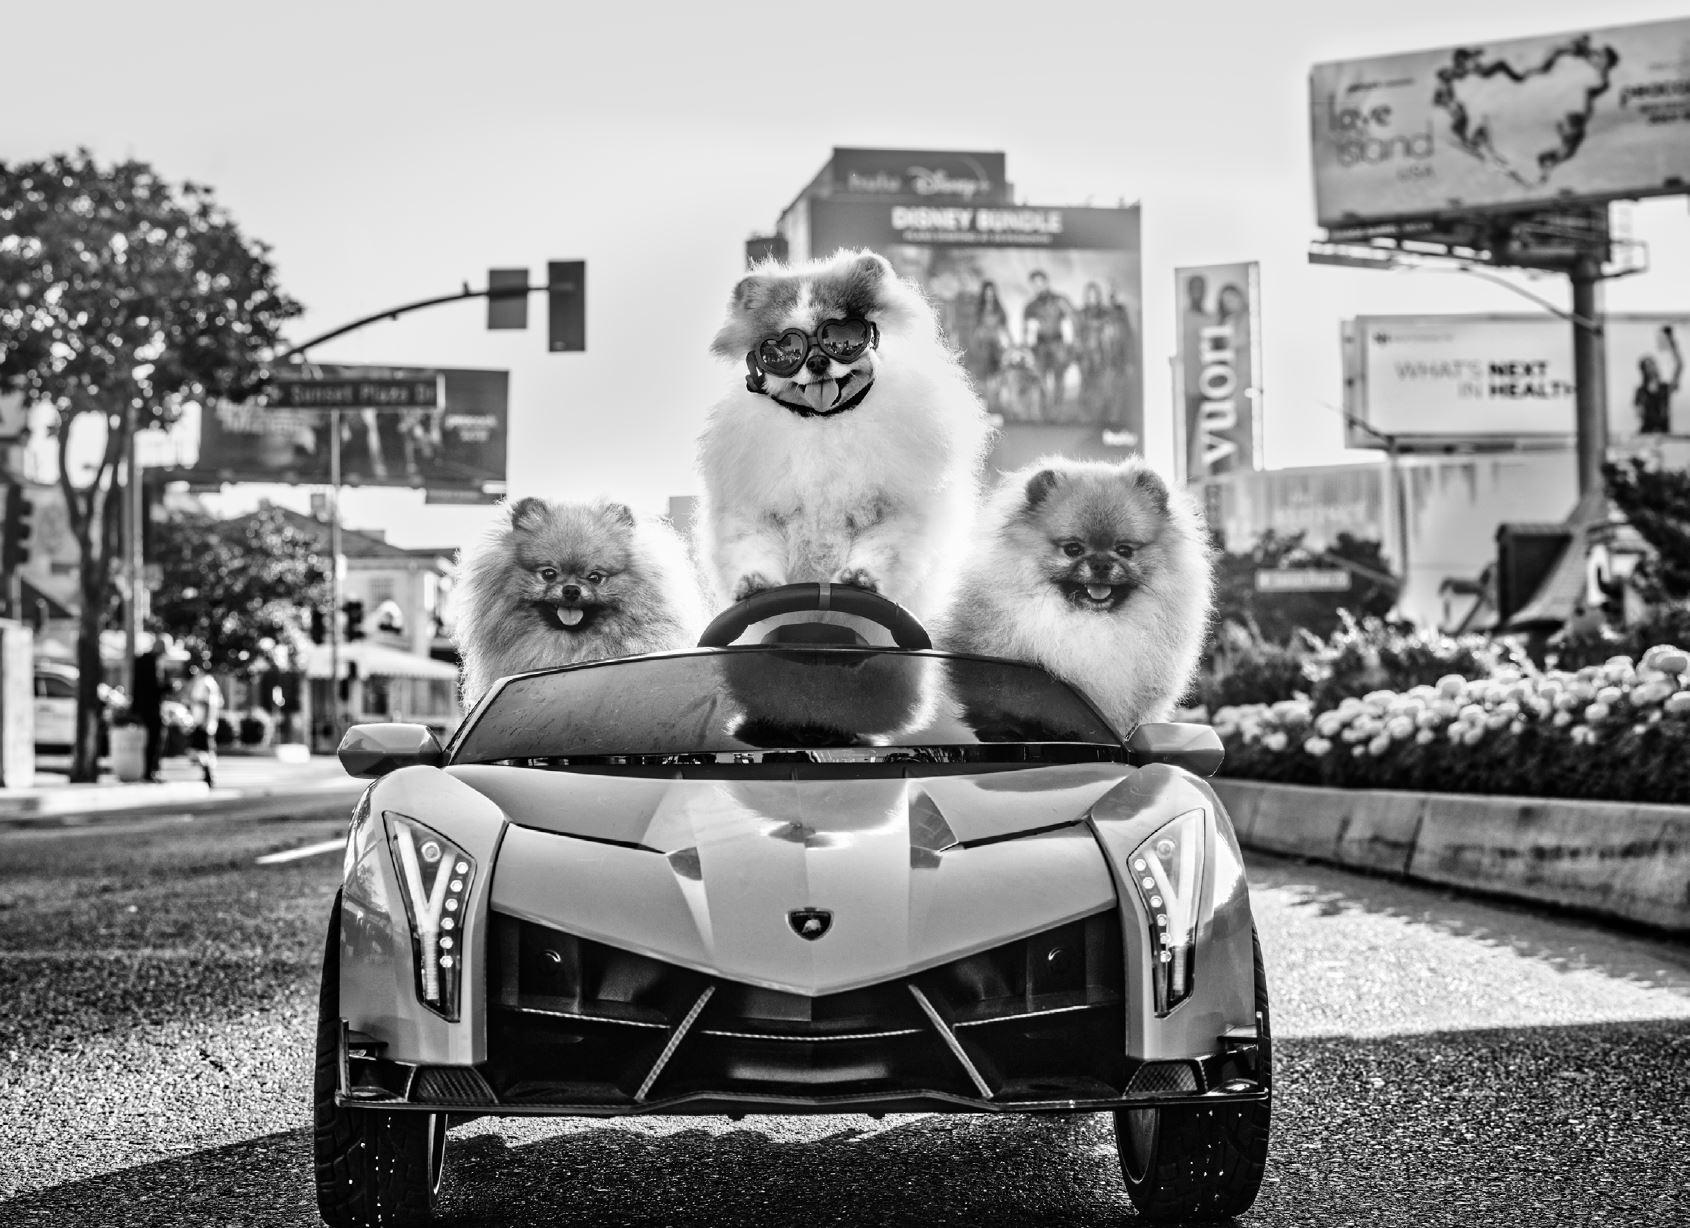 David Yarrow Black and White Photograph - 'Who let the dogs out' - three Pomeranians in a Car, fine art photography, 2023